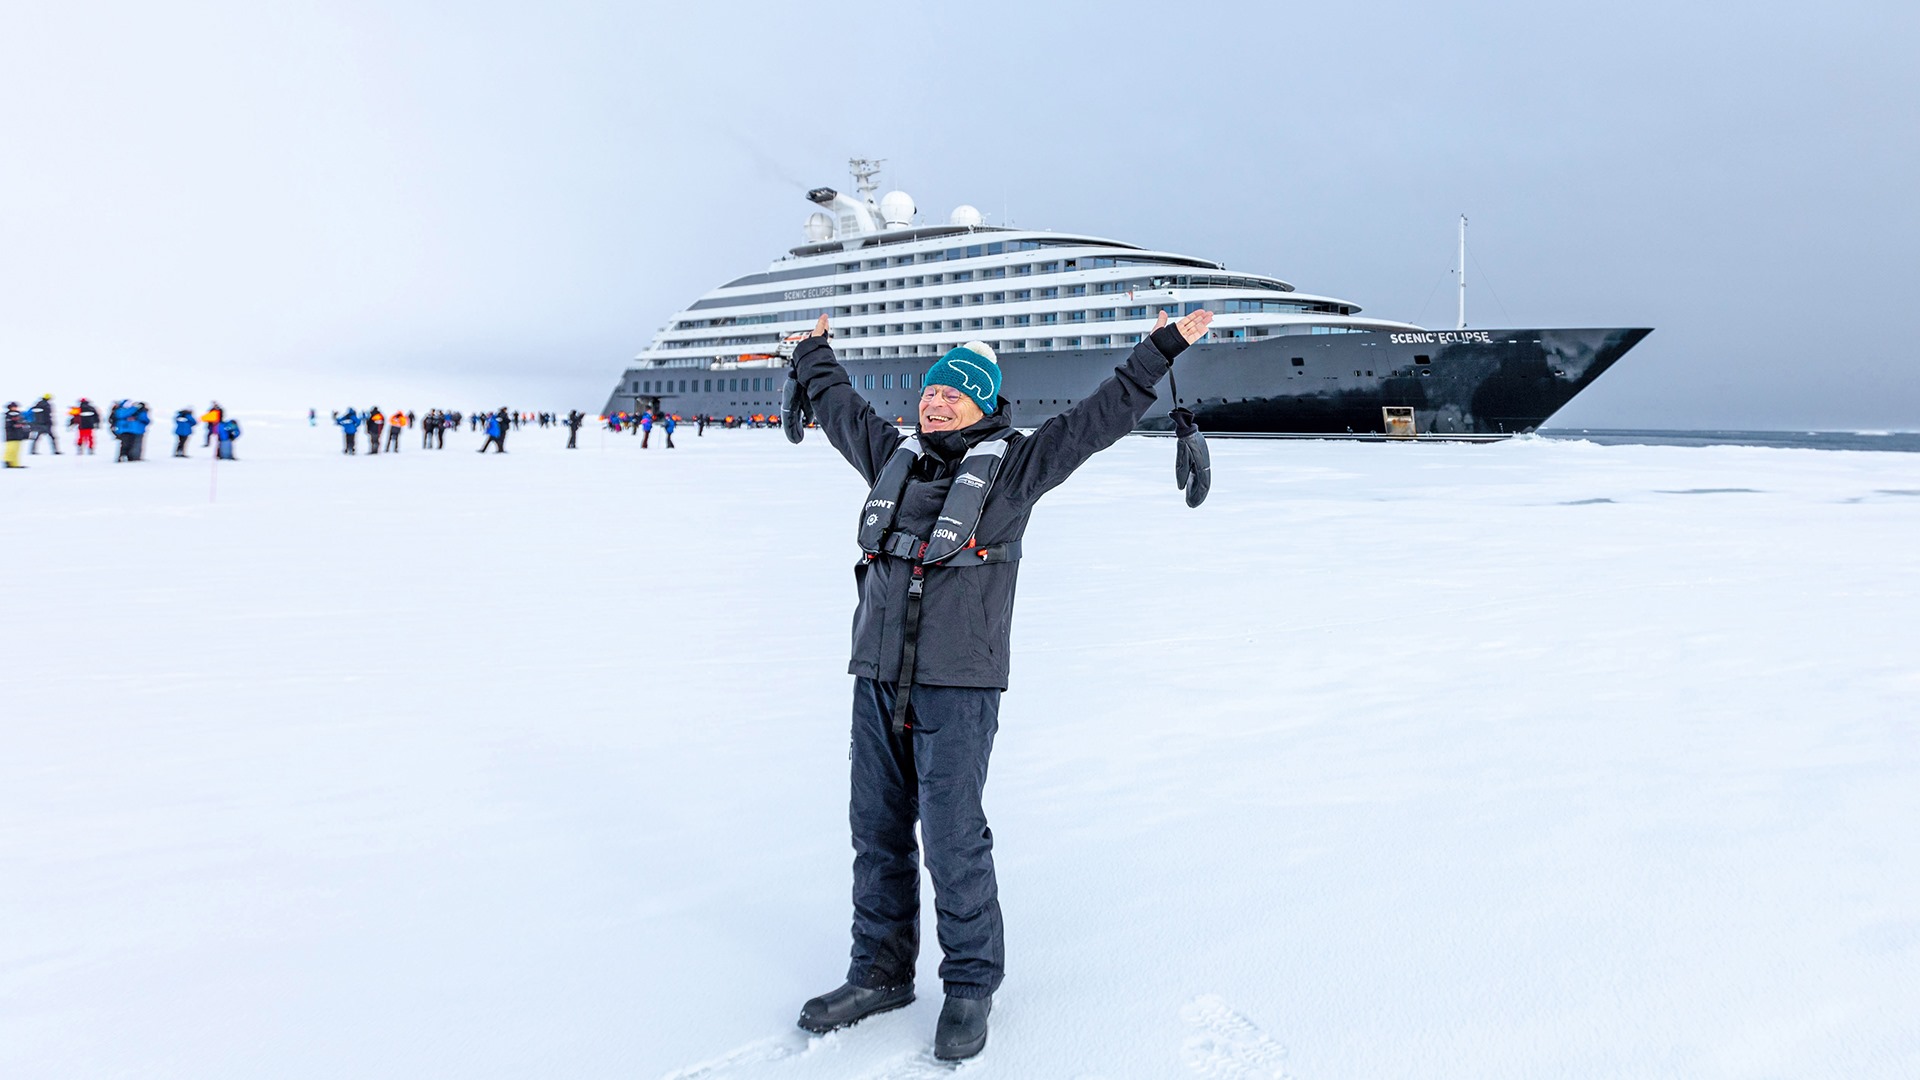 As the popularity of expedition cruising to Antarctica continues to gain momentum, Scenic introduces new itineraries that allow guests to avoid the nearly two-day Drake Passage journey.